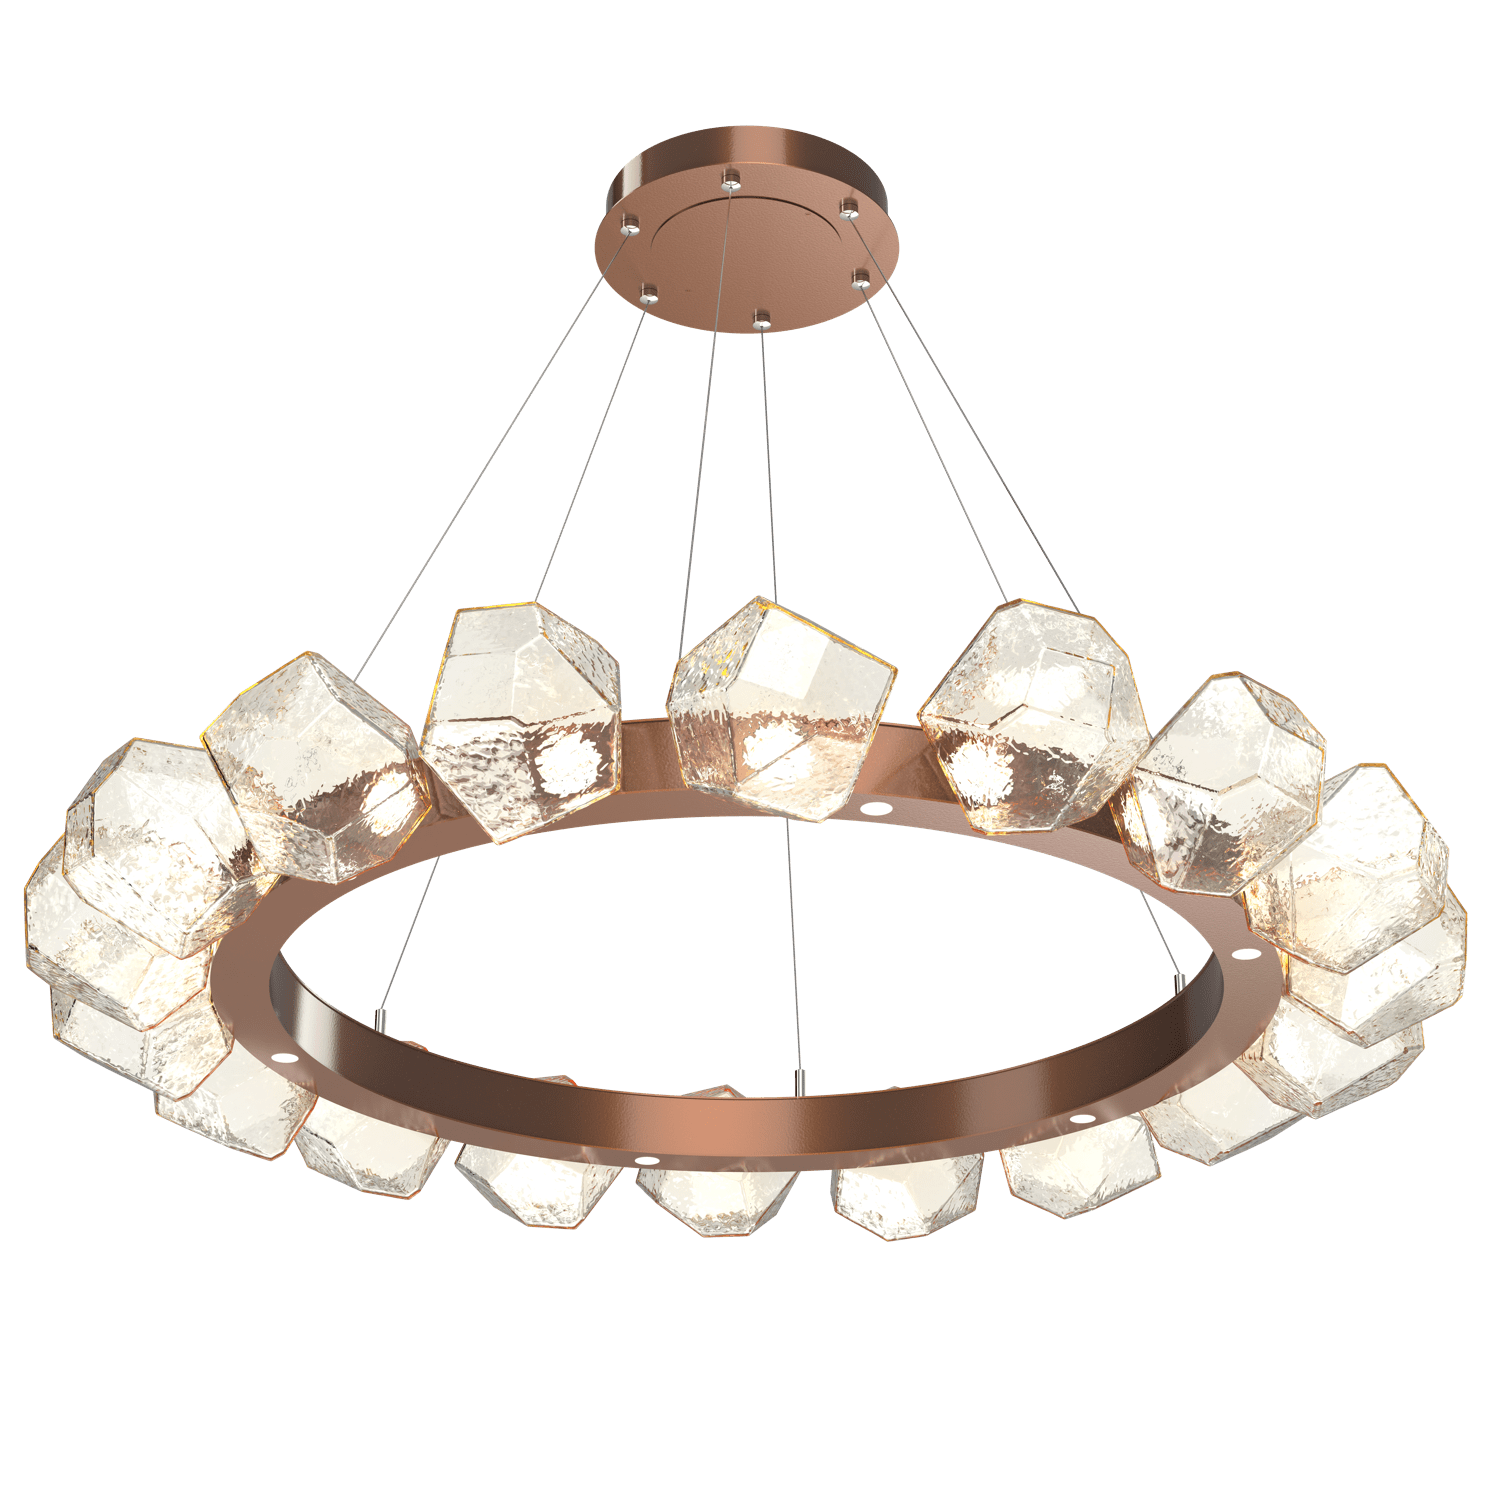 CHB0039-48-BB-A-Hammerton-Studio-Gem-48-inch-radial-ring-chandelier-with-burnished-bronze-finish-and-amber-blown-glass-shades-and-LED-lamping